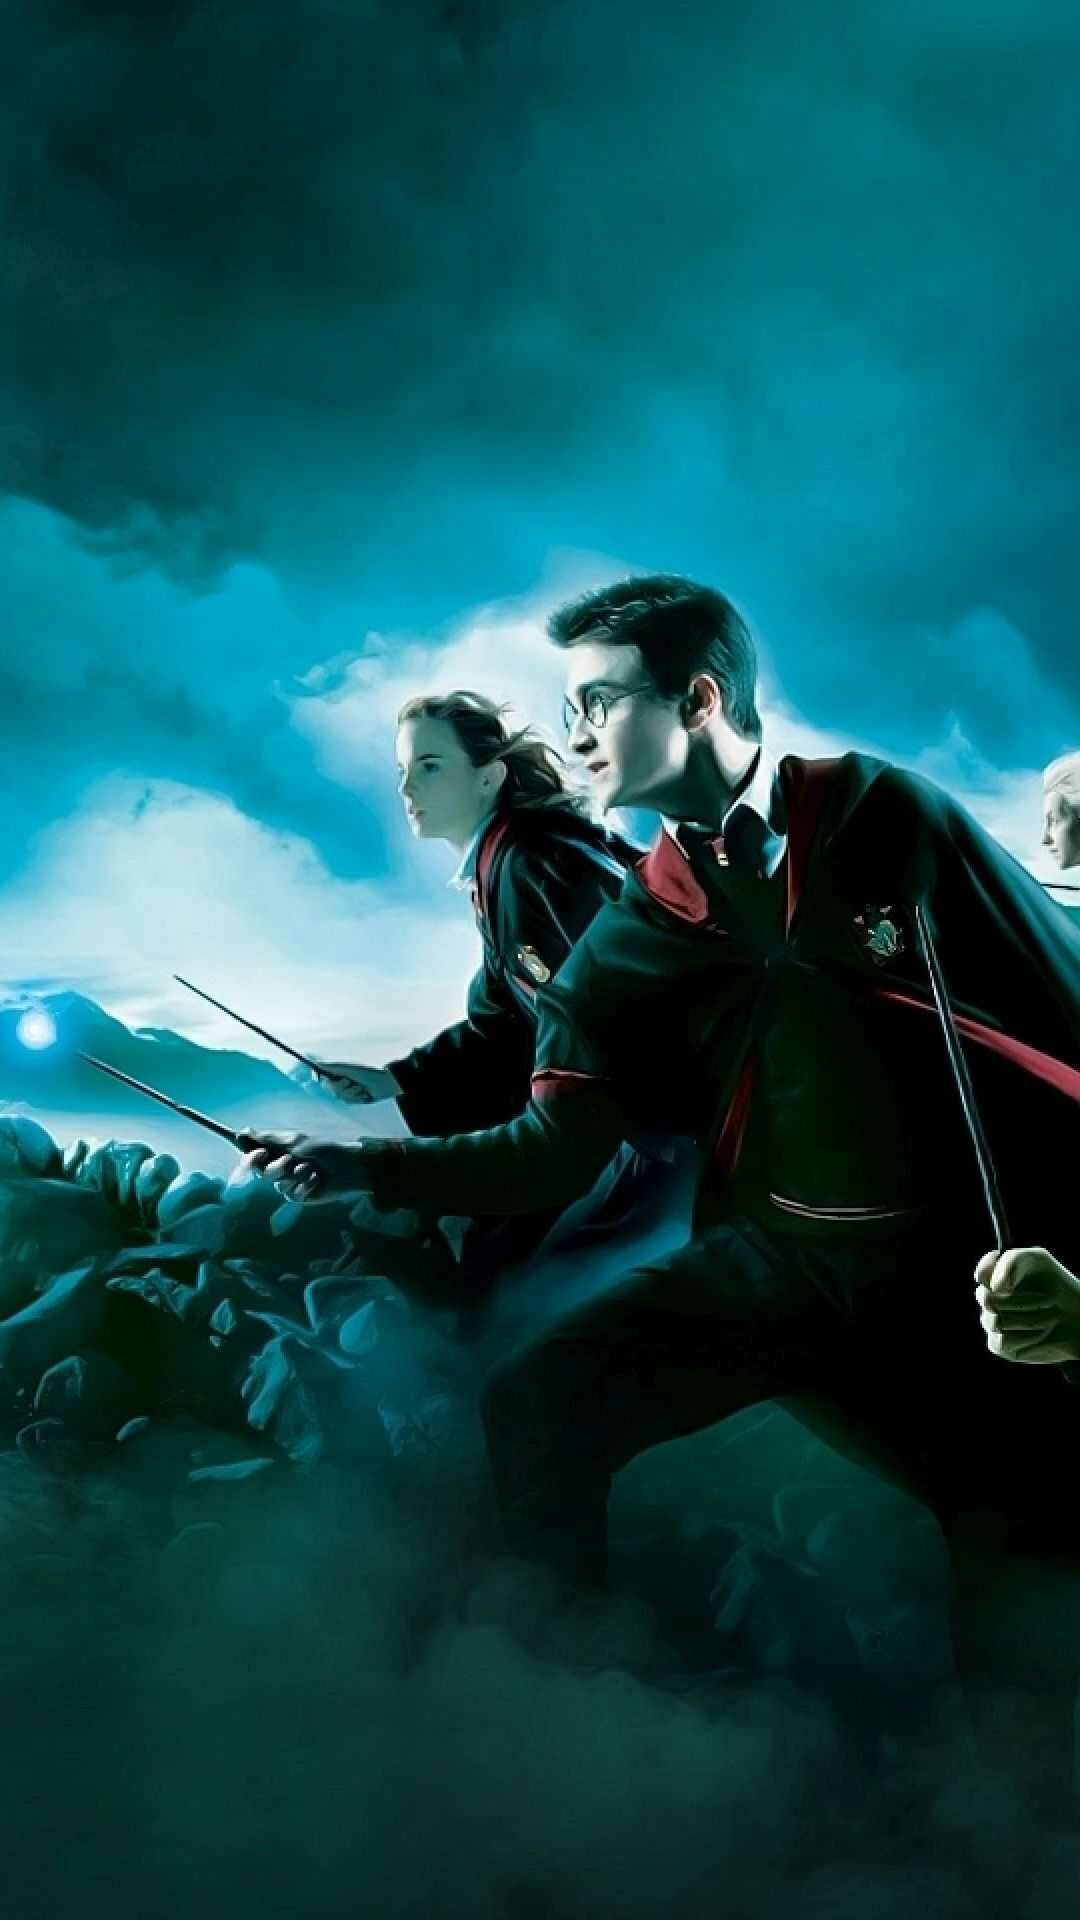 Harry Potter: HP and the Order of the Phoenix, A 2007 fantasy film directed by David Yates. 1080x1920 Full HD Background.